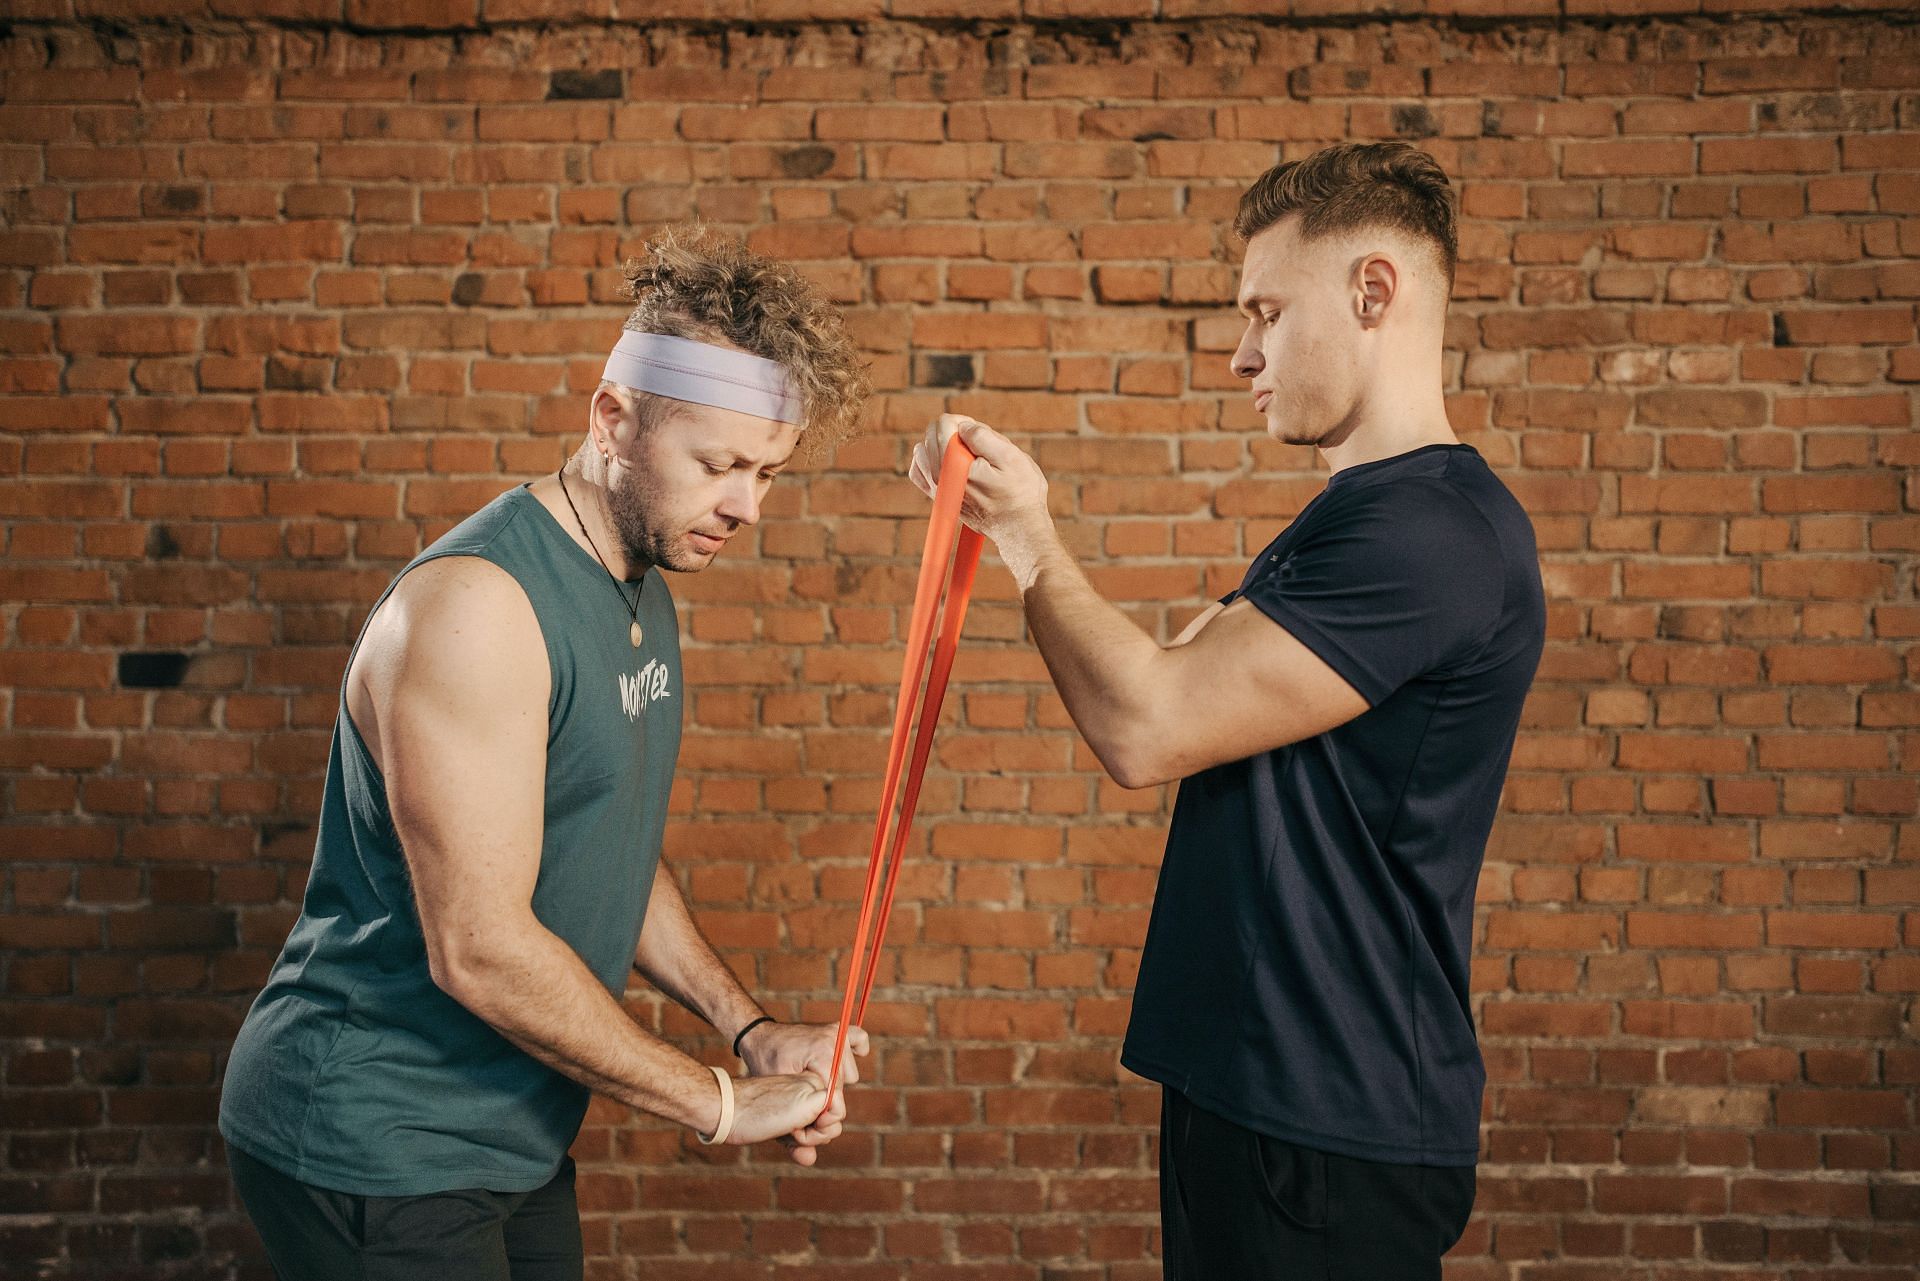 Best resistance band chest exercises to build muscle mass. (Image via Pexels/Pavel Danilyuk)